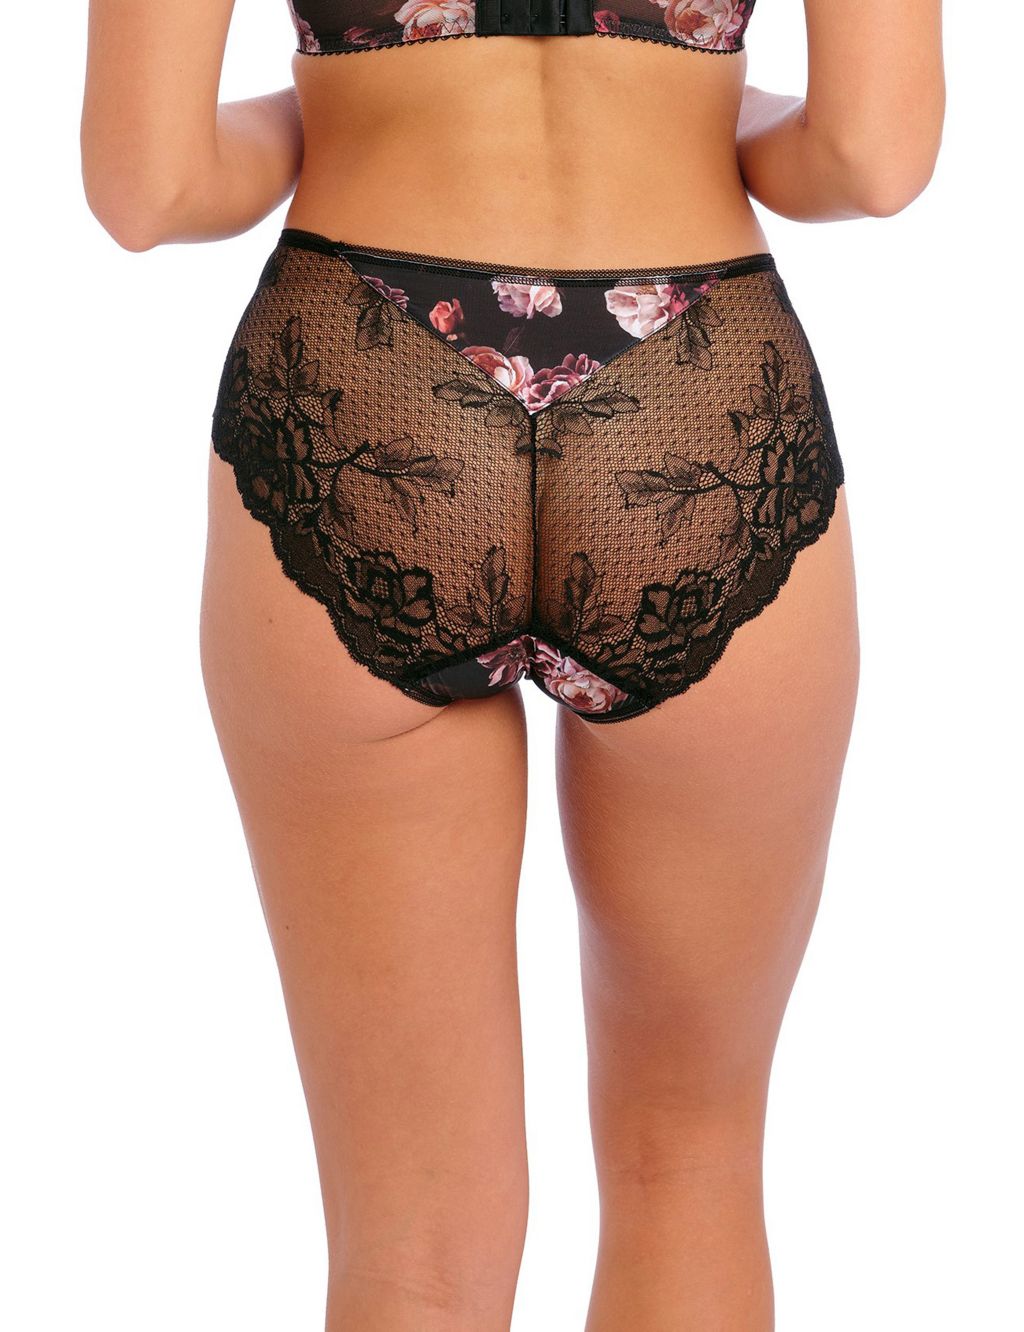 Pippa Lace Floral Knicker Shorts image 4